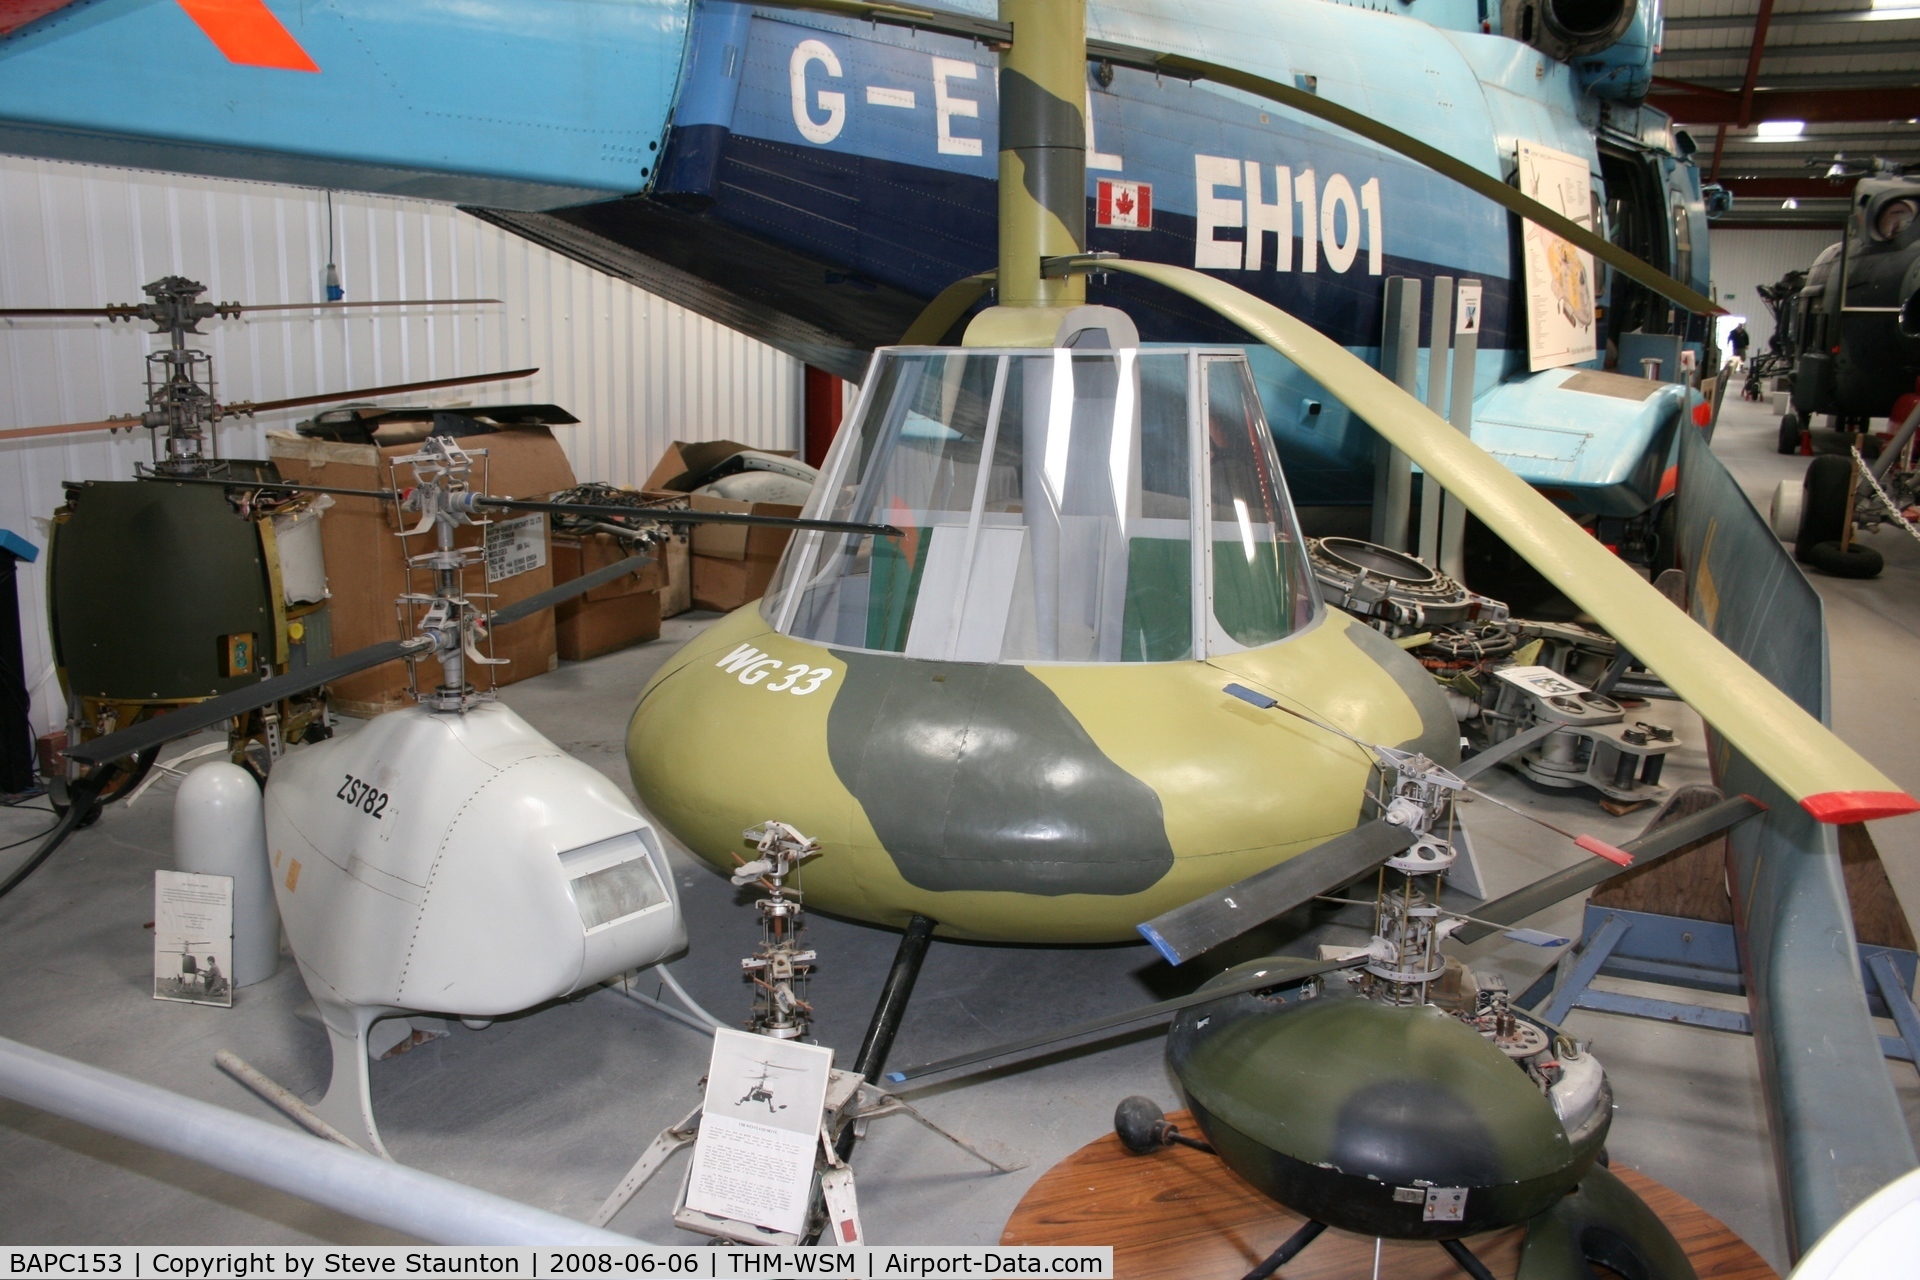 BAPC153, 1977 Westland WG-33 C/N BAPC.153, Taken at the Helicopter Museum (http://www.helicoptermuseum.co.uk/)